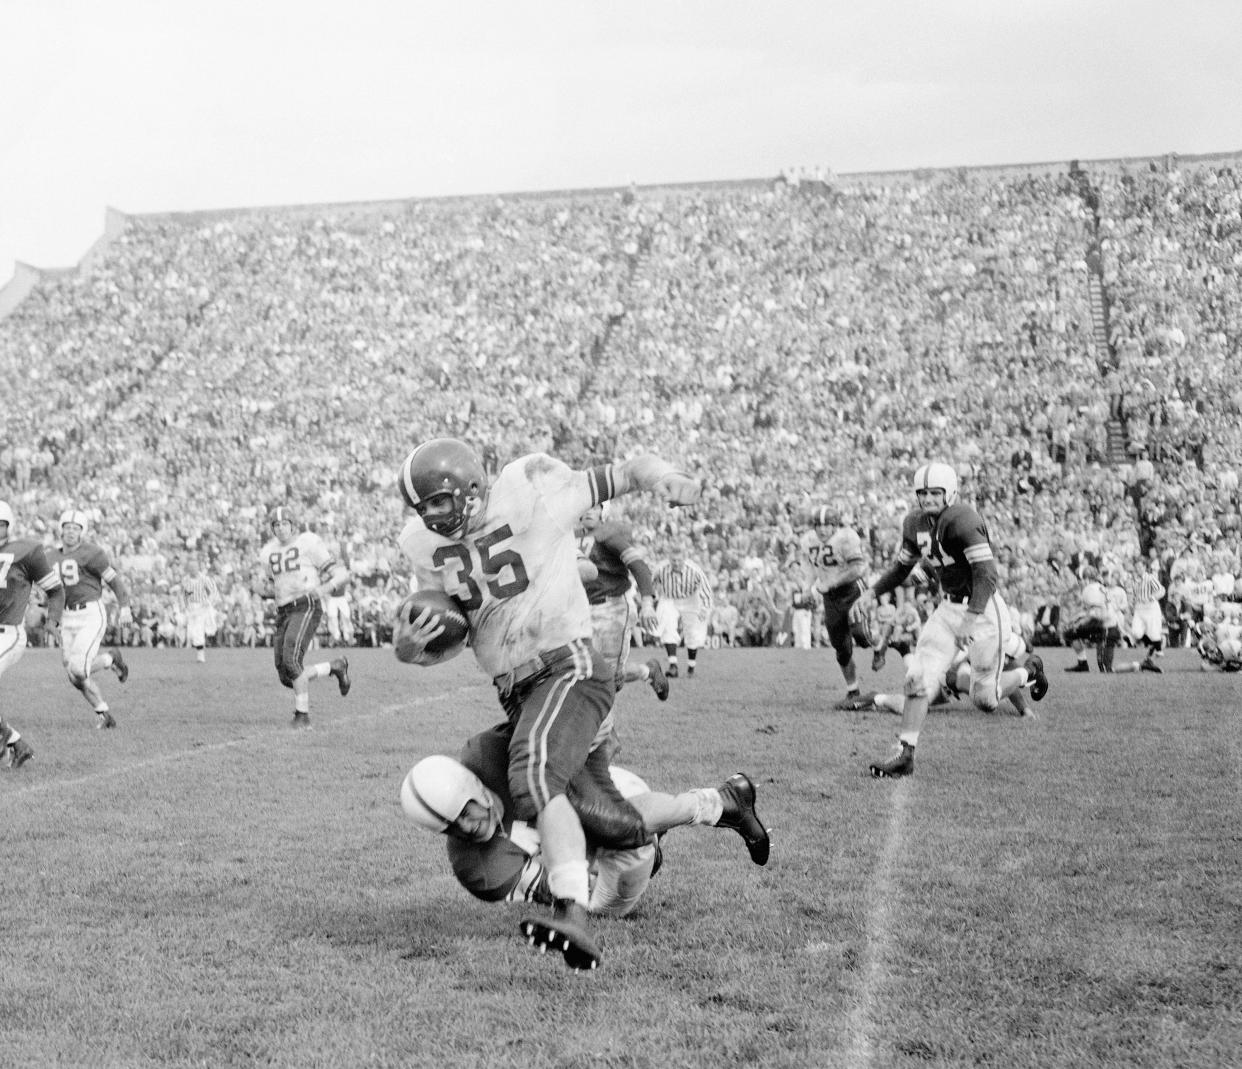 A two-time All-American and the 1954 Heisman Trophy winner, Alan Ameche set the NCAA career rushing record while at Wisconsin.